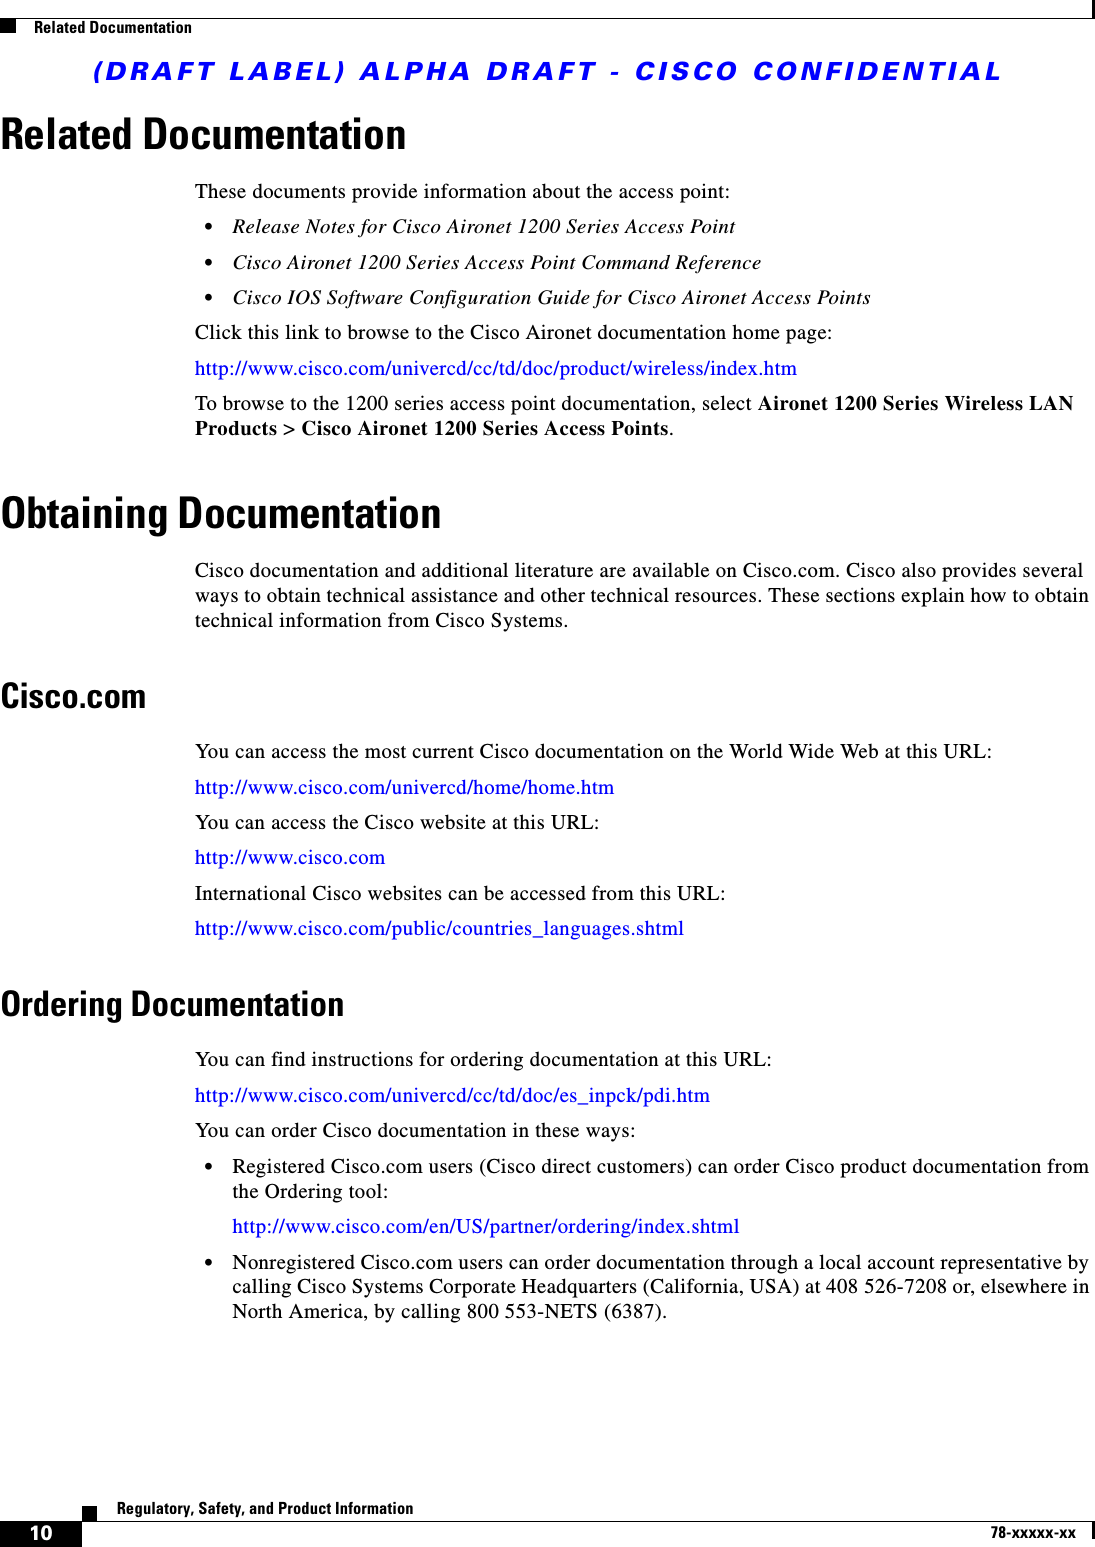 (DRAFT LABEL) ALPHA DRAFT - CISCO CONFIDENTIAL10Regulatory, Safety, and Product Information78-xxxxx-xxRelated DocumentationRelated Documentation These documents provide information about the access point:•Release Notes for Cisco Aironet 1200 Series Access Point •Cisco Aironet 1200 Series Access Point Command Reference •Cisco IOS Software Configuration Guide for Cisco Aironet Access PointsClick this link to browse to the Cisco Aironet documentation home page:http://www.cisco.com/univercd/cc/td/doc/product/wireless/index.htmTo browse to the 1200 series access point documentation, select Aironet 1200 Series Wireless LAN Products &gt; Cisco Aironet 1200 Series Access Points.Obtaining DocumentationCisco documentation and additional literature are available on Cisco.com. Cisco also provides several ways to obtain technical assistance and other technical resources. These sections explain how to obtain technical information from Cisco Systems.Cisco.comYou can access the most current Cisco documentation on the World Wide Web at this URL:http://www.cisco.com/univercd/home/home.htmYou can access the Cisco website at this URL:http://www.cisco.comInternational Cisco websites can be accessed from this URL:http://www.cisco.com/public/countries_languages.shtmlOrdering DocumentationYou can find instructions for ordering documentation at this URL:http://www.cisco.com/univercd/cc/td/doc/es_inpck/pdi.htmYou can order Cisco documentation in these ways:•Registered Cisco.com users (Cisco direct customers) can order Cisco product documentation from the Ordering tool:http://www.cisco.com/en/US/partner/ordering/index.shtml•Nonregistered Cisco.com users can order documentation through a local account representative by calling Cisco Systems Corporate Headquarters (California, USA) at 408 526-7208 or, elsewhere in North America, by calling 800 553-NETS (6387).